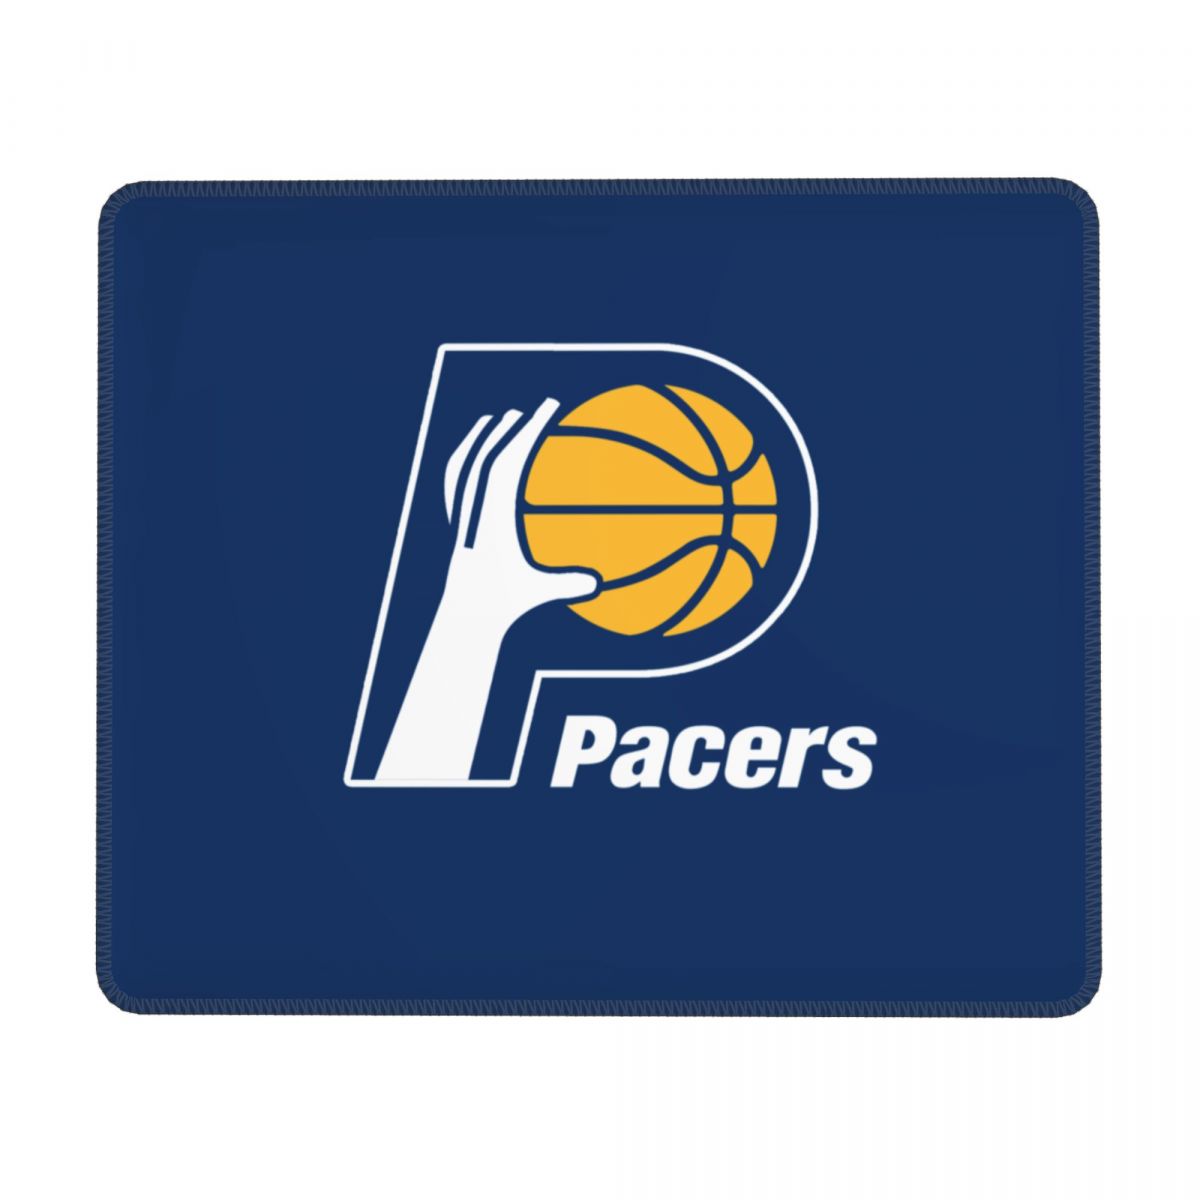 Indiana Pacers Primary Retro Logo Square Rubber Base MousePads